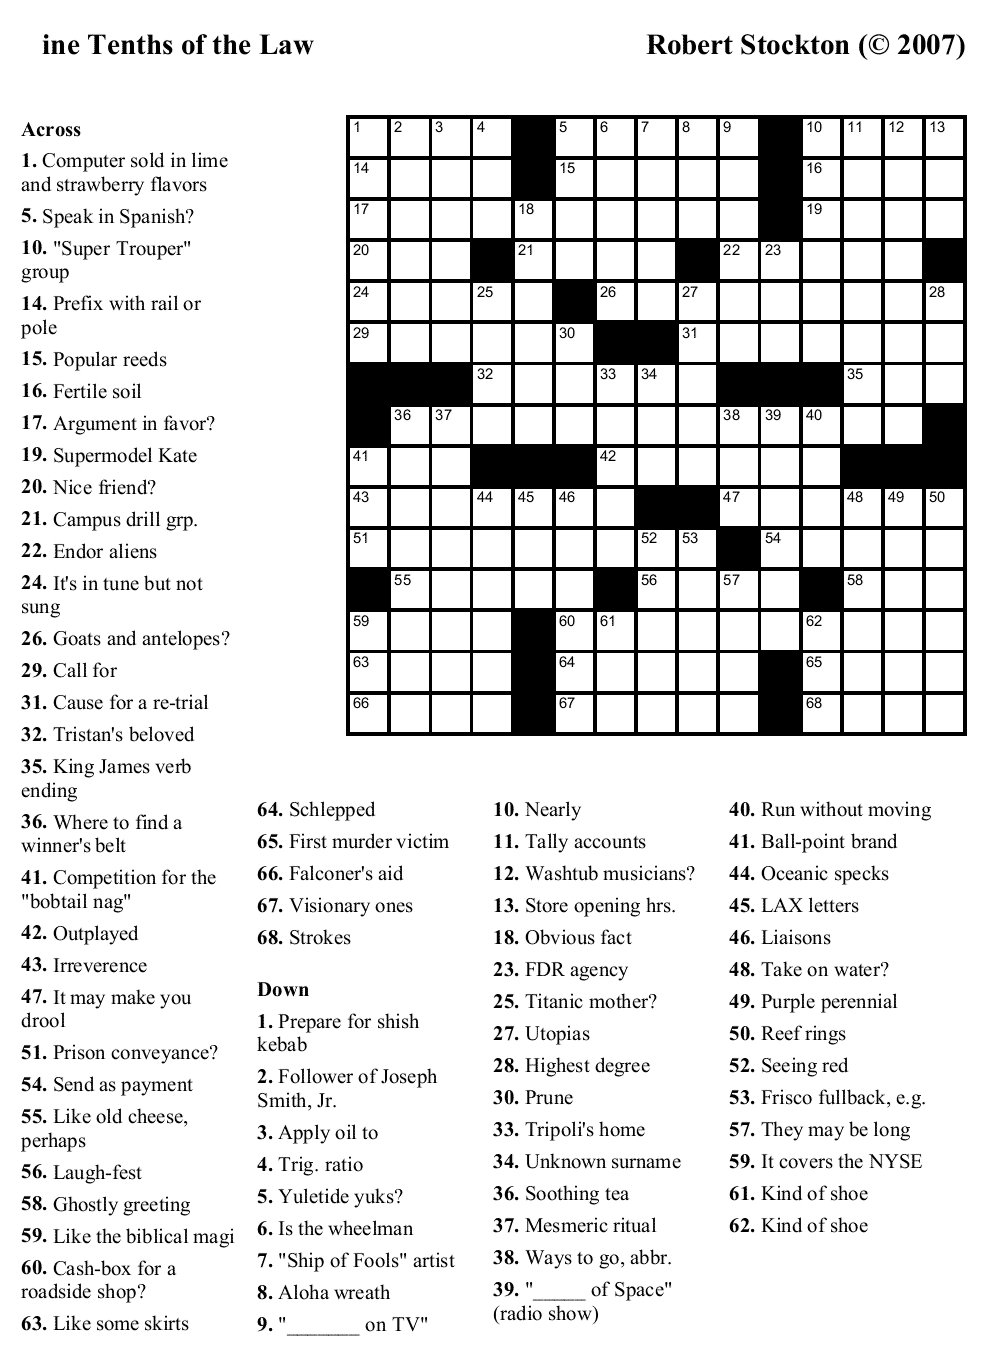 Crossword Puzzles Printable - Yahoo Image Search Results | Crossword - Printable Crossword Puzzles About Sports